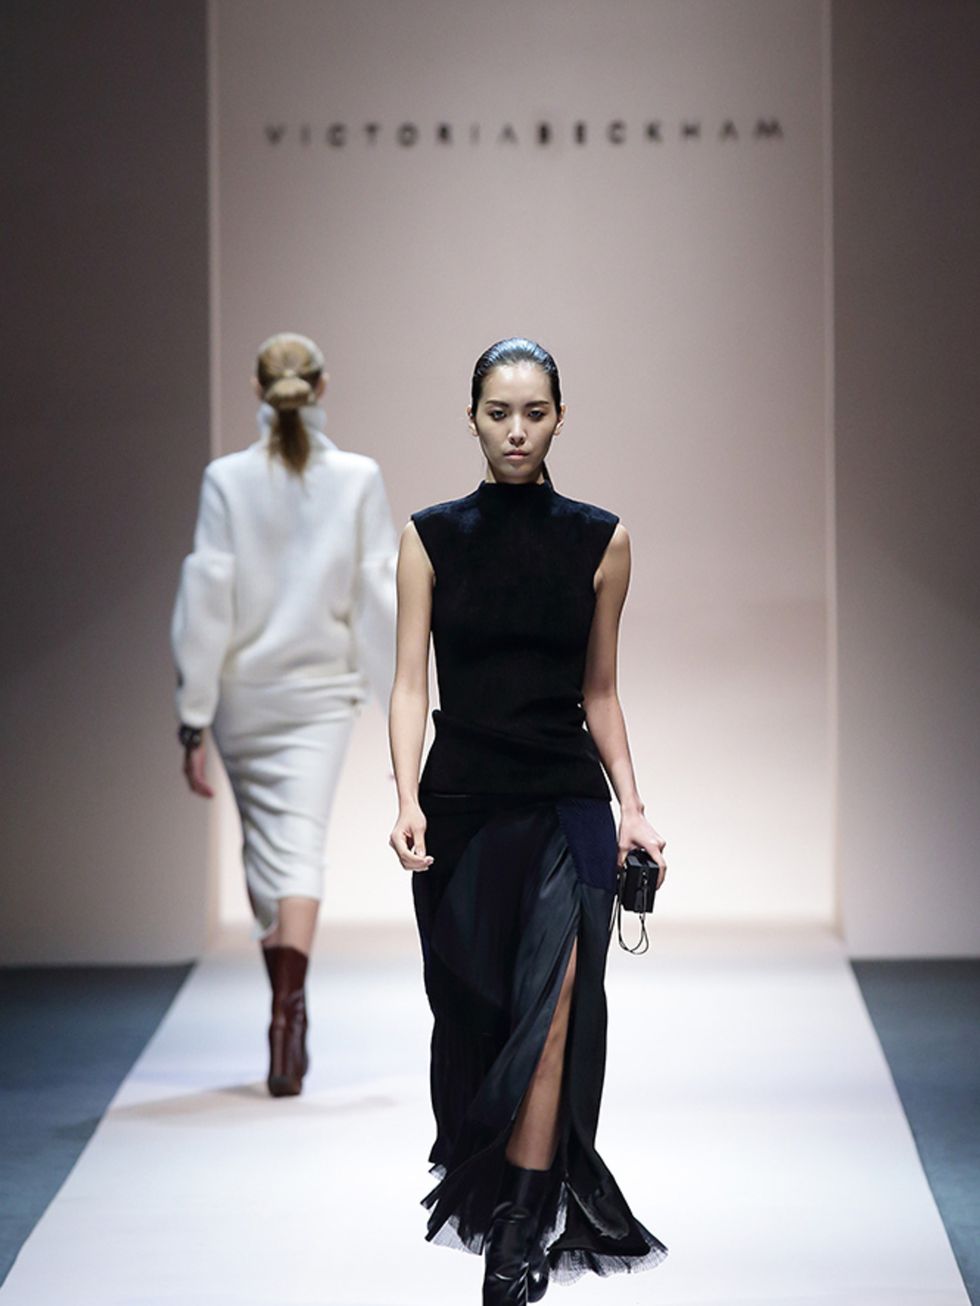 <p><a href="http://www.elleuk.com/tags/victoria-beckham" target="_blank">VICTORIA BECKHAM </a></p>

<p>What will she do next? Coming off the back of her strongest collection to date (aw15) and powering on with her brilliant pre-spring, the sky&rsquo;s the